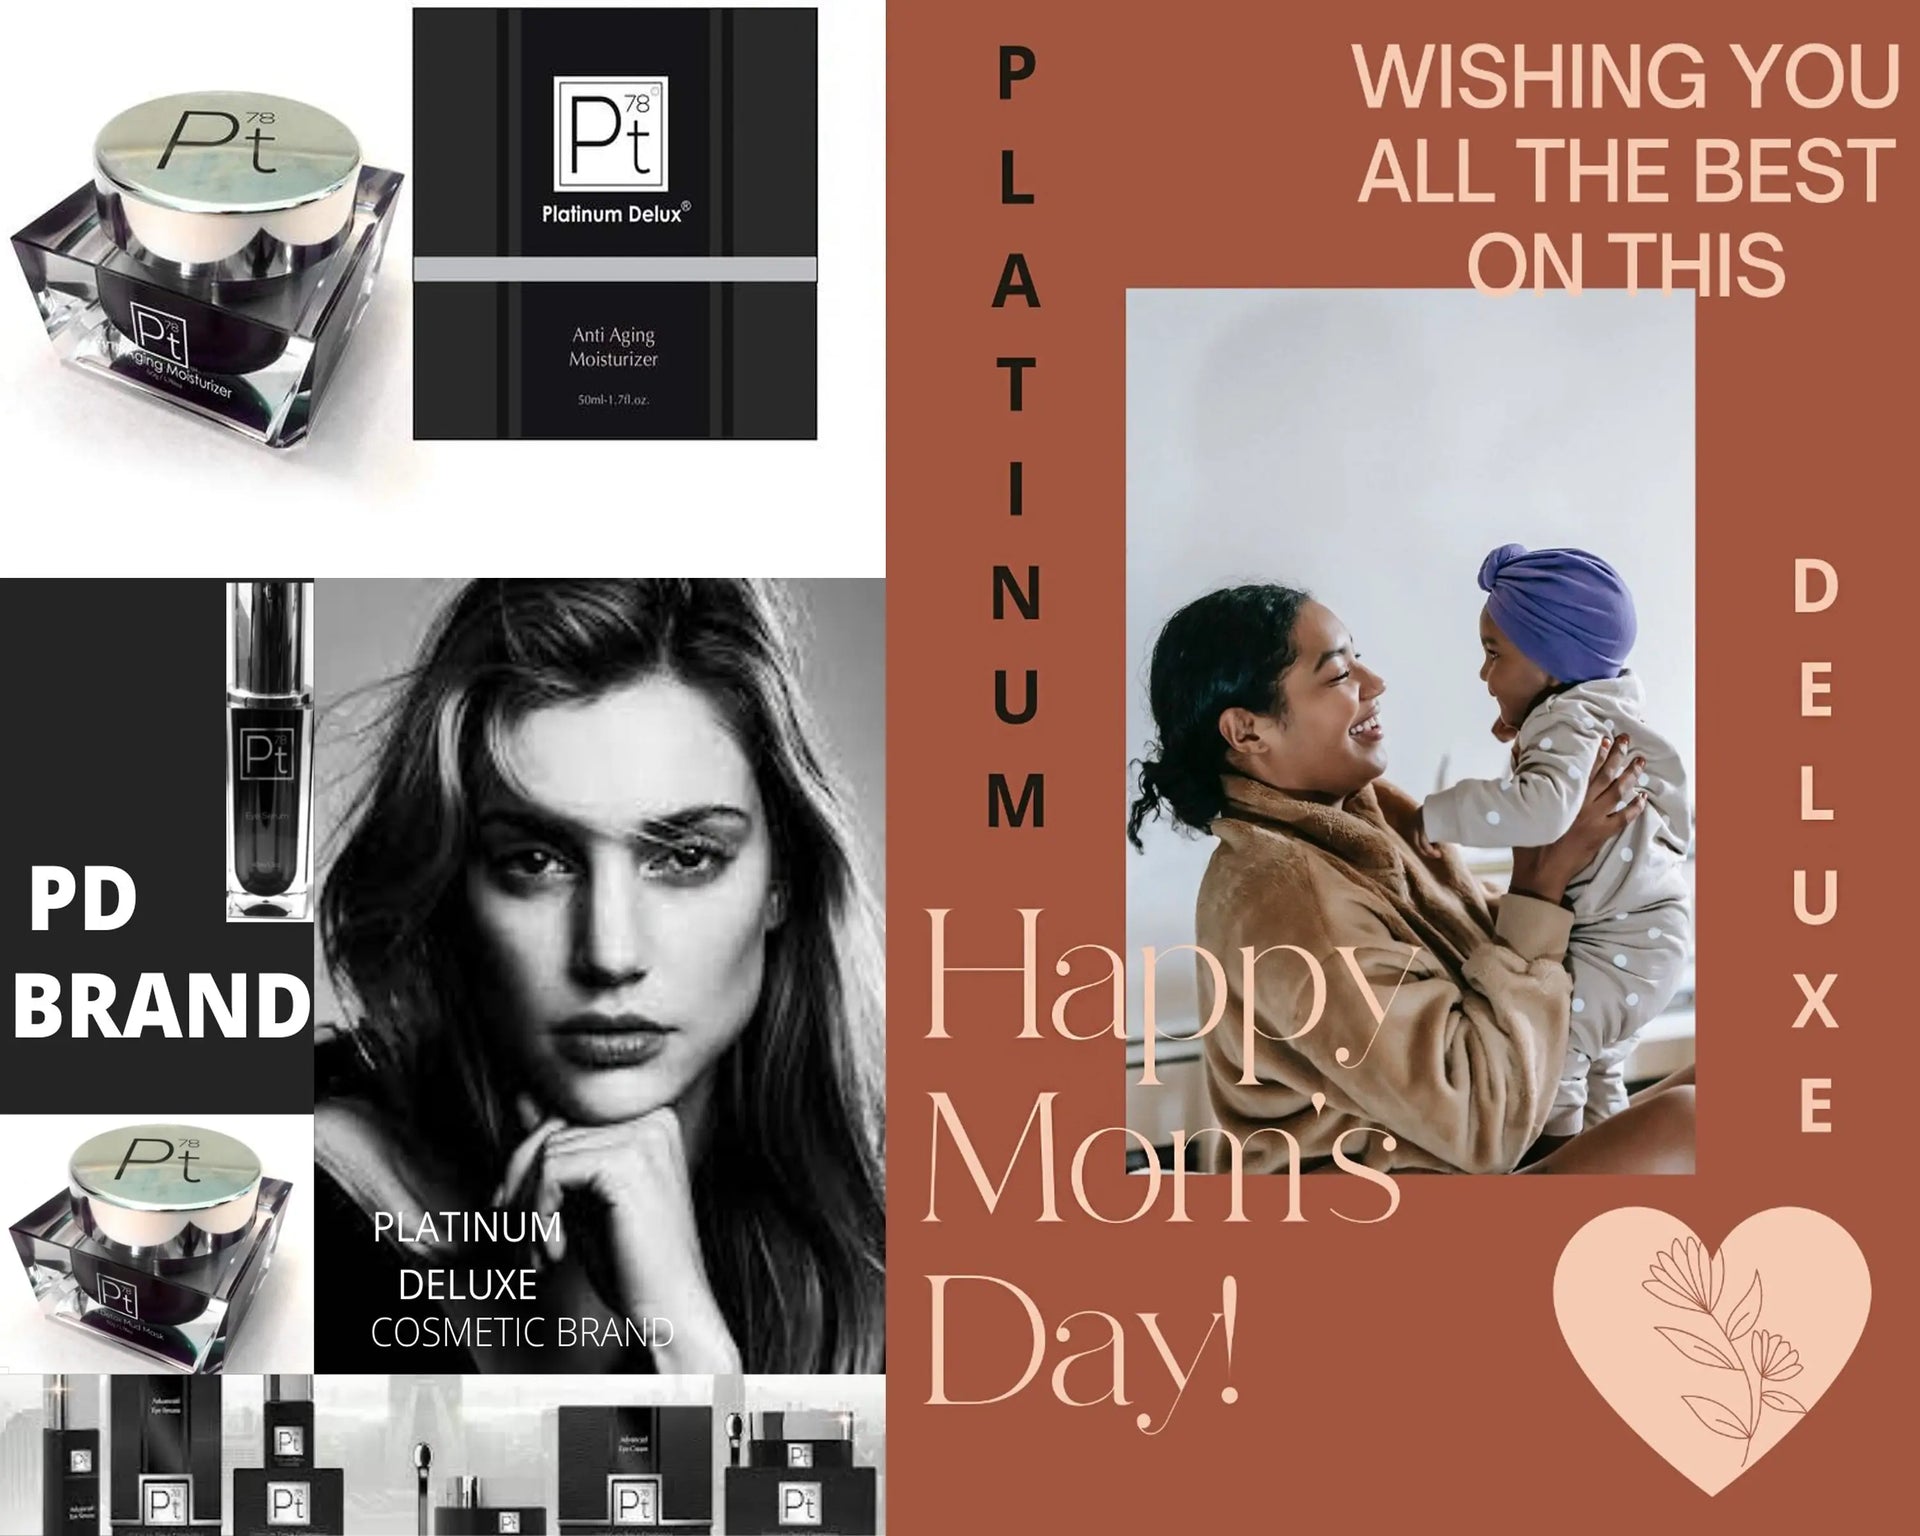 Things to do on Mother's day Platinum Delux ®